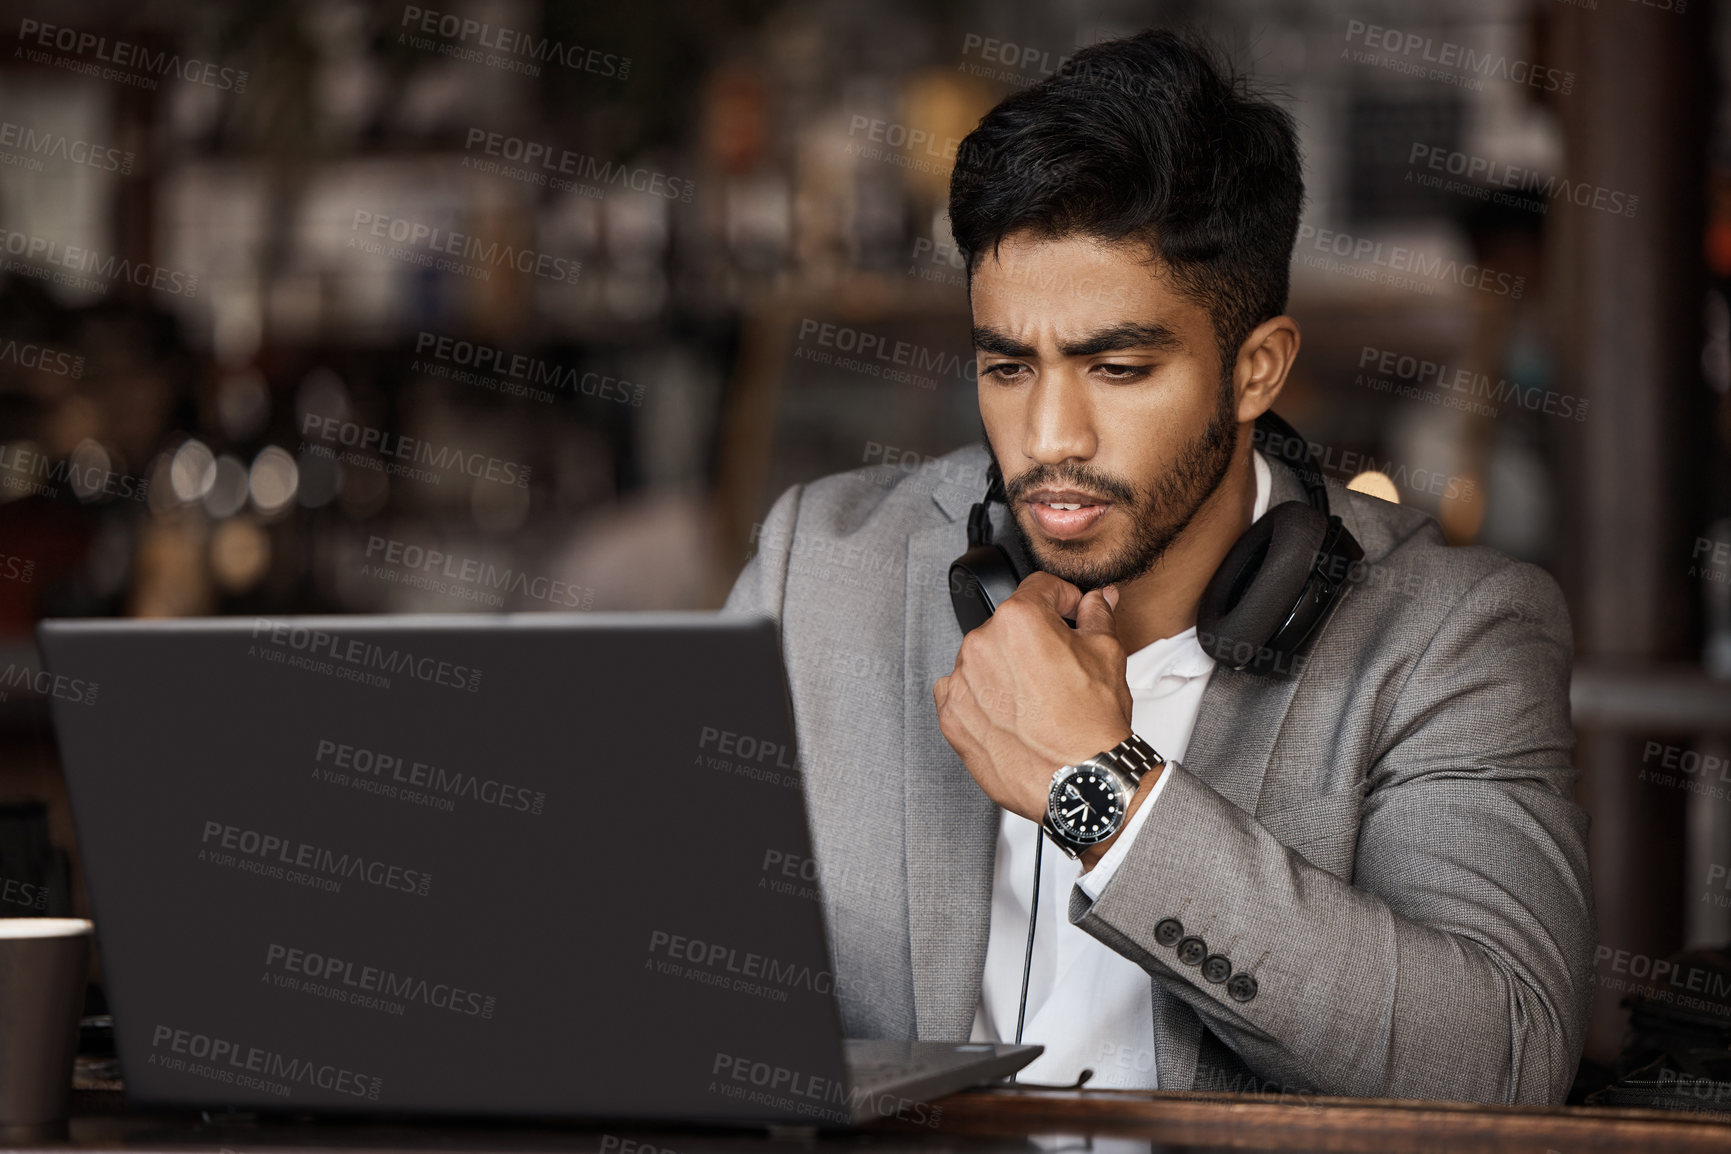 Buy stock photo Thinking, laptop or businessman with research in cafe reading news for online stock market update. Pensive, remote work or trader working on solution or trading in coffee shop on digital technology